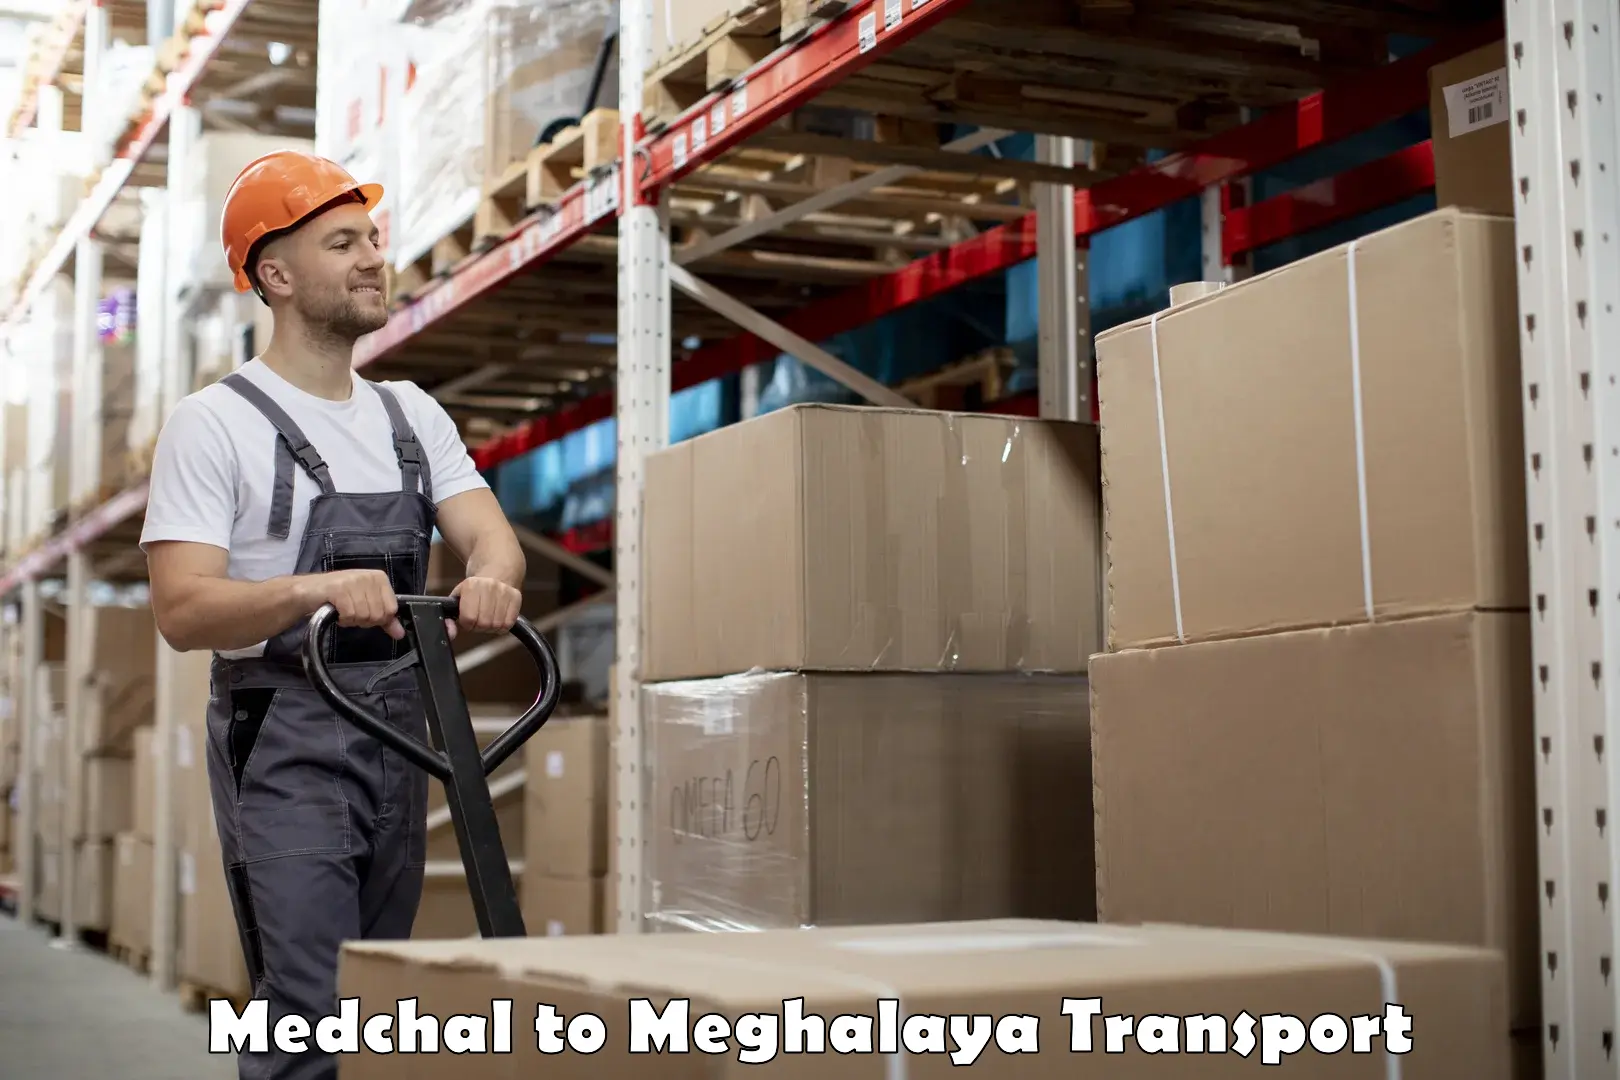 Lorry transport service Medchal to Nongpoh